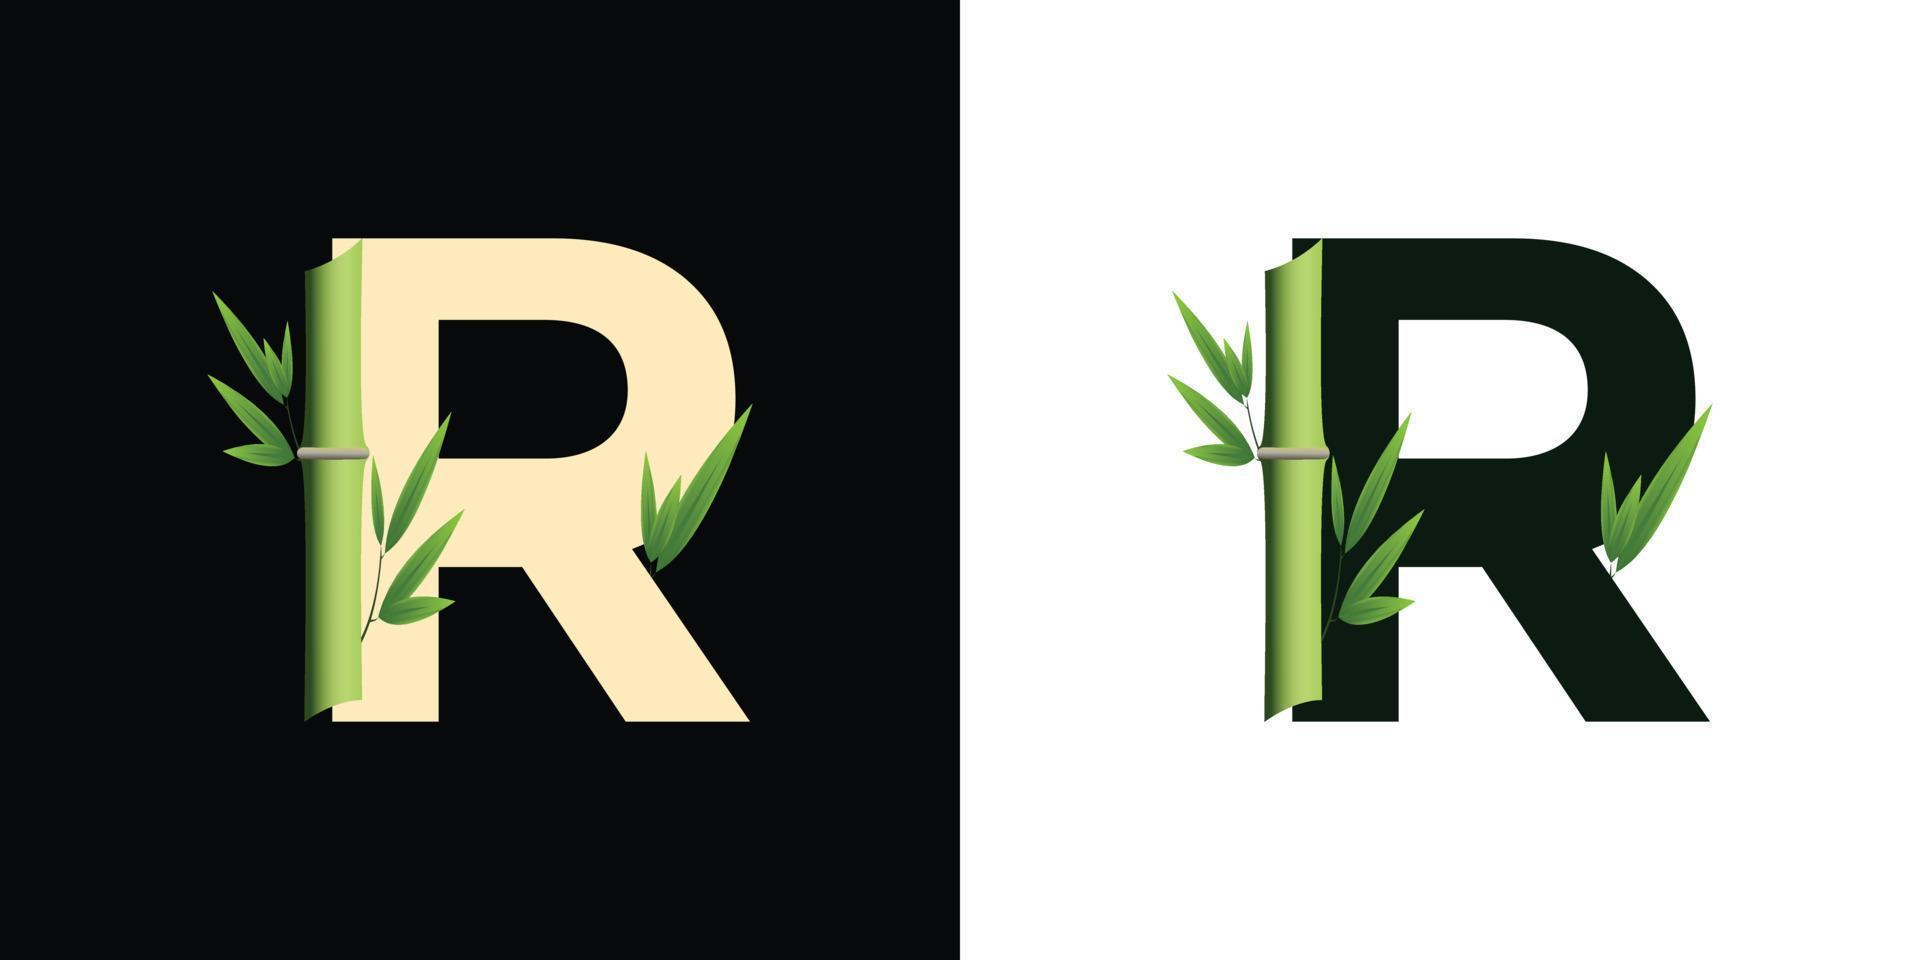 r bamboo logo icon design with template creative initials based lettes vector